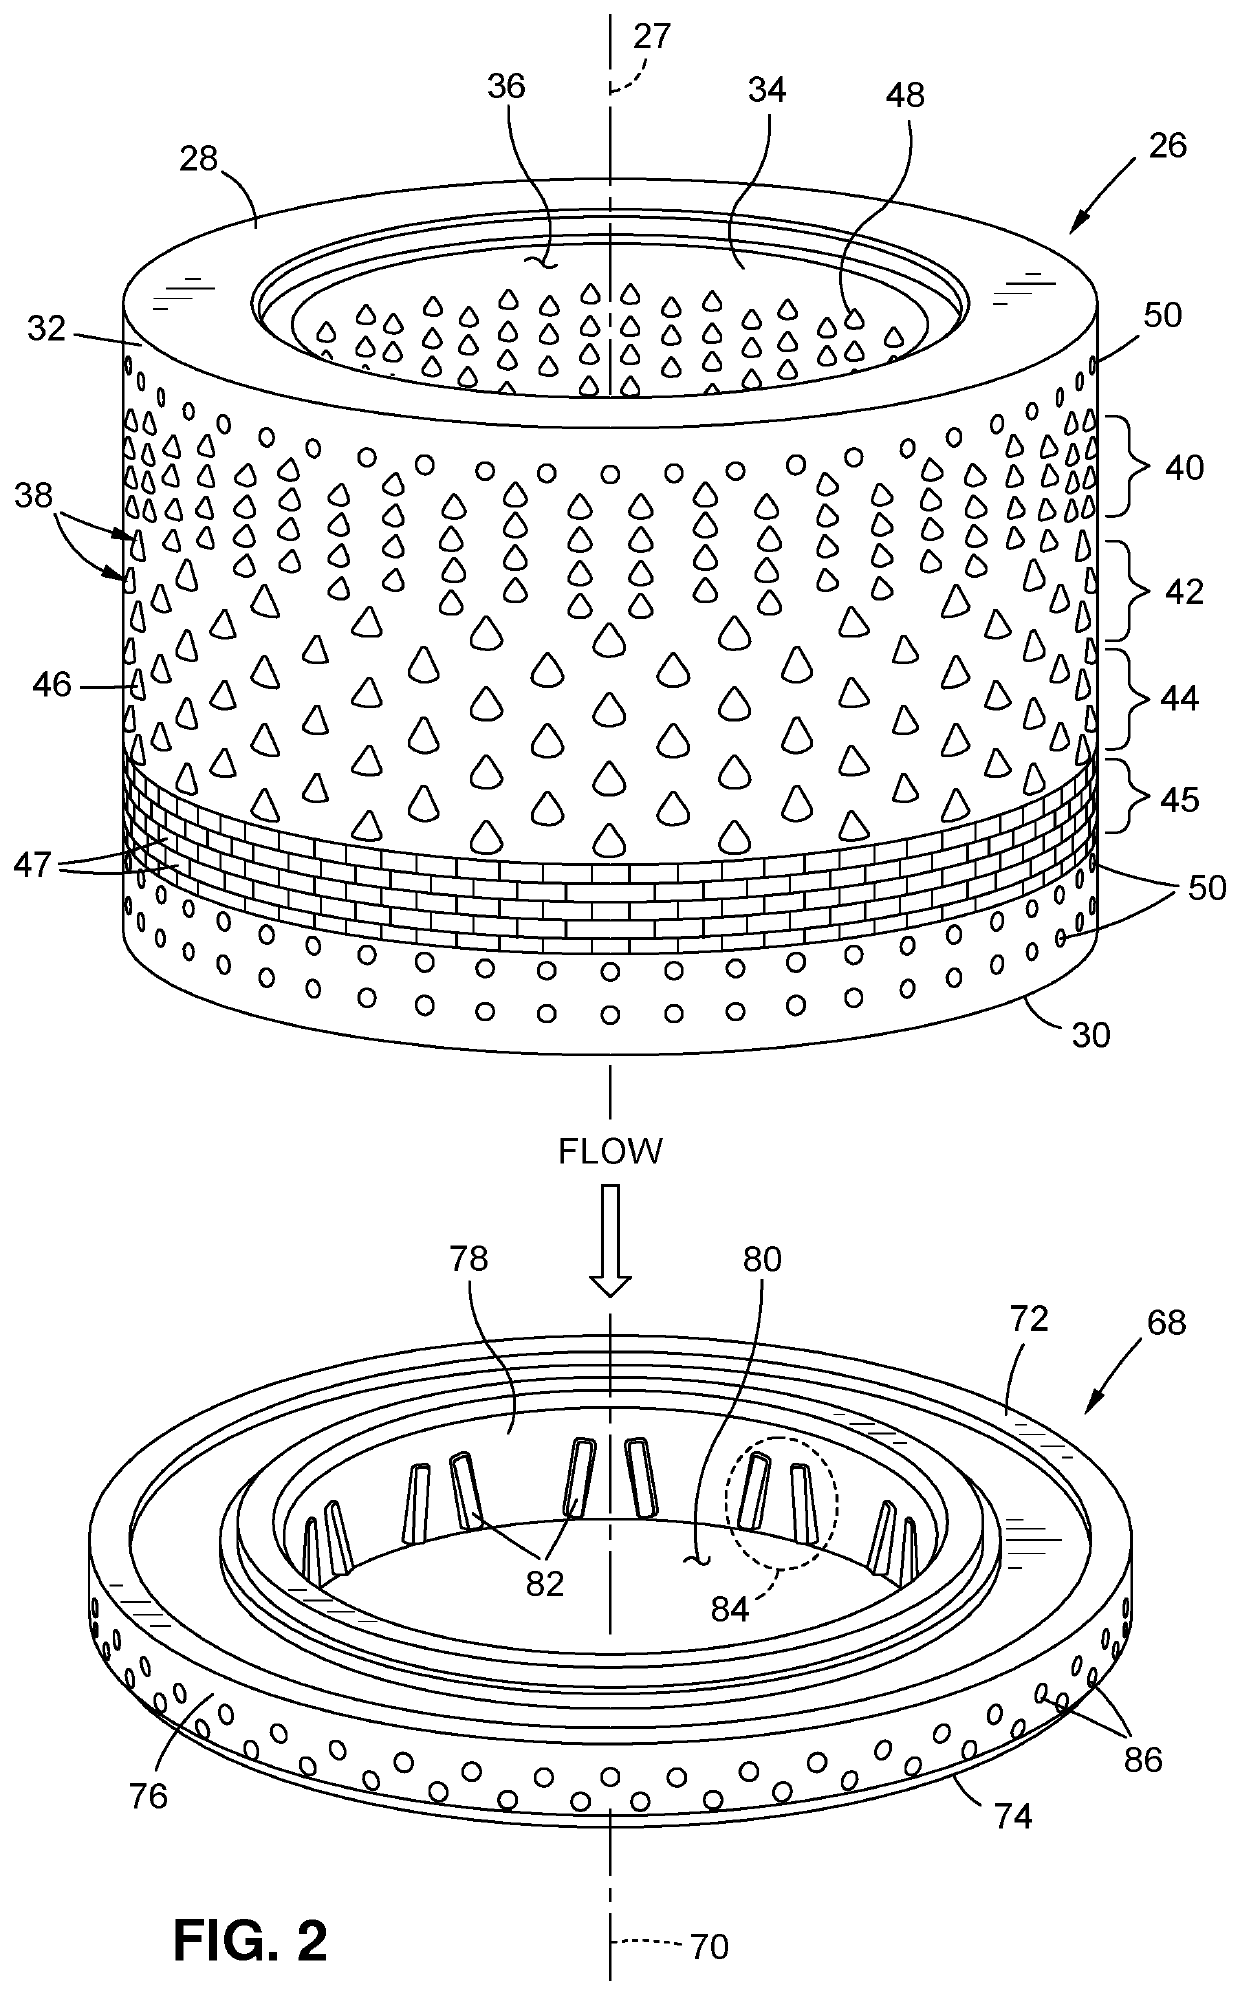 Additively manufactured control valve flow element